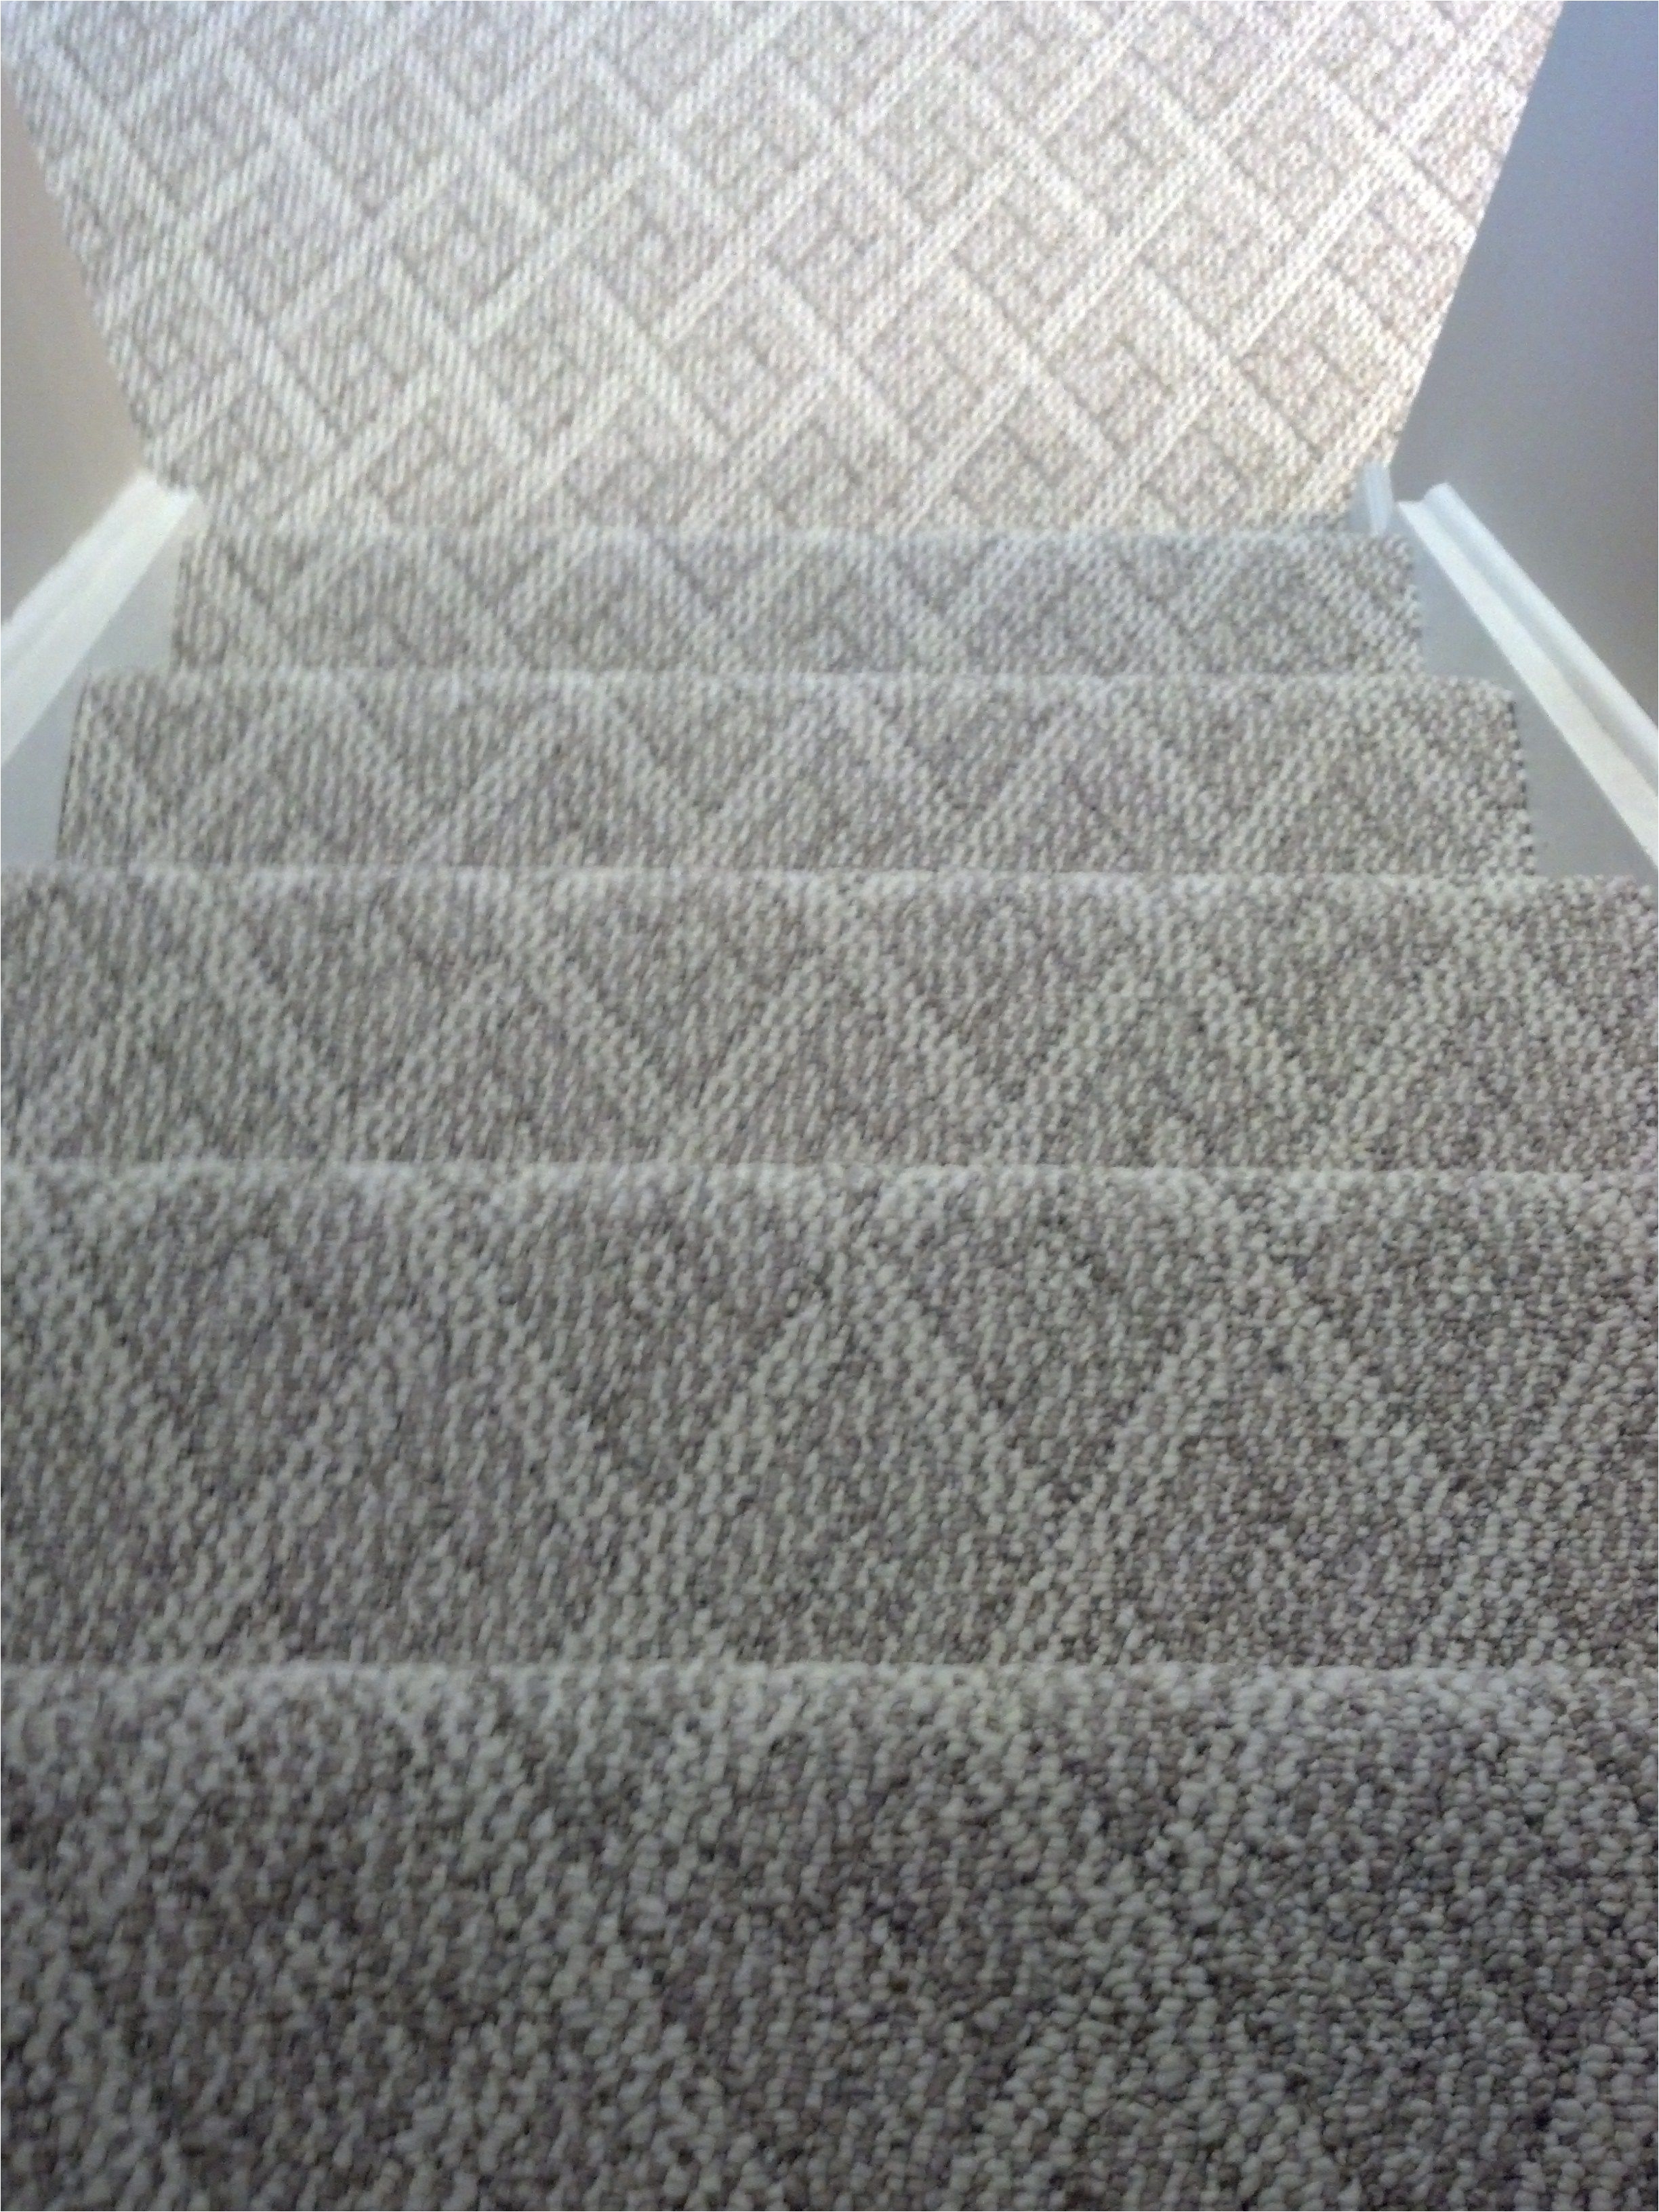 berber carpet cincinnati ohio installed on steps and basement family room note notice the pattern lining up on each step and floor